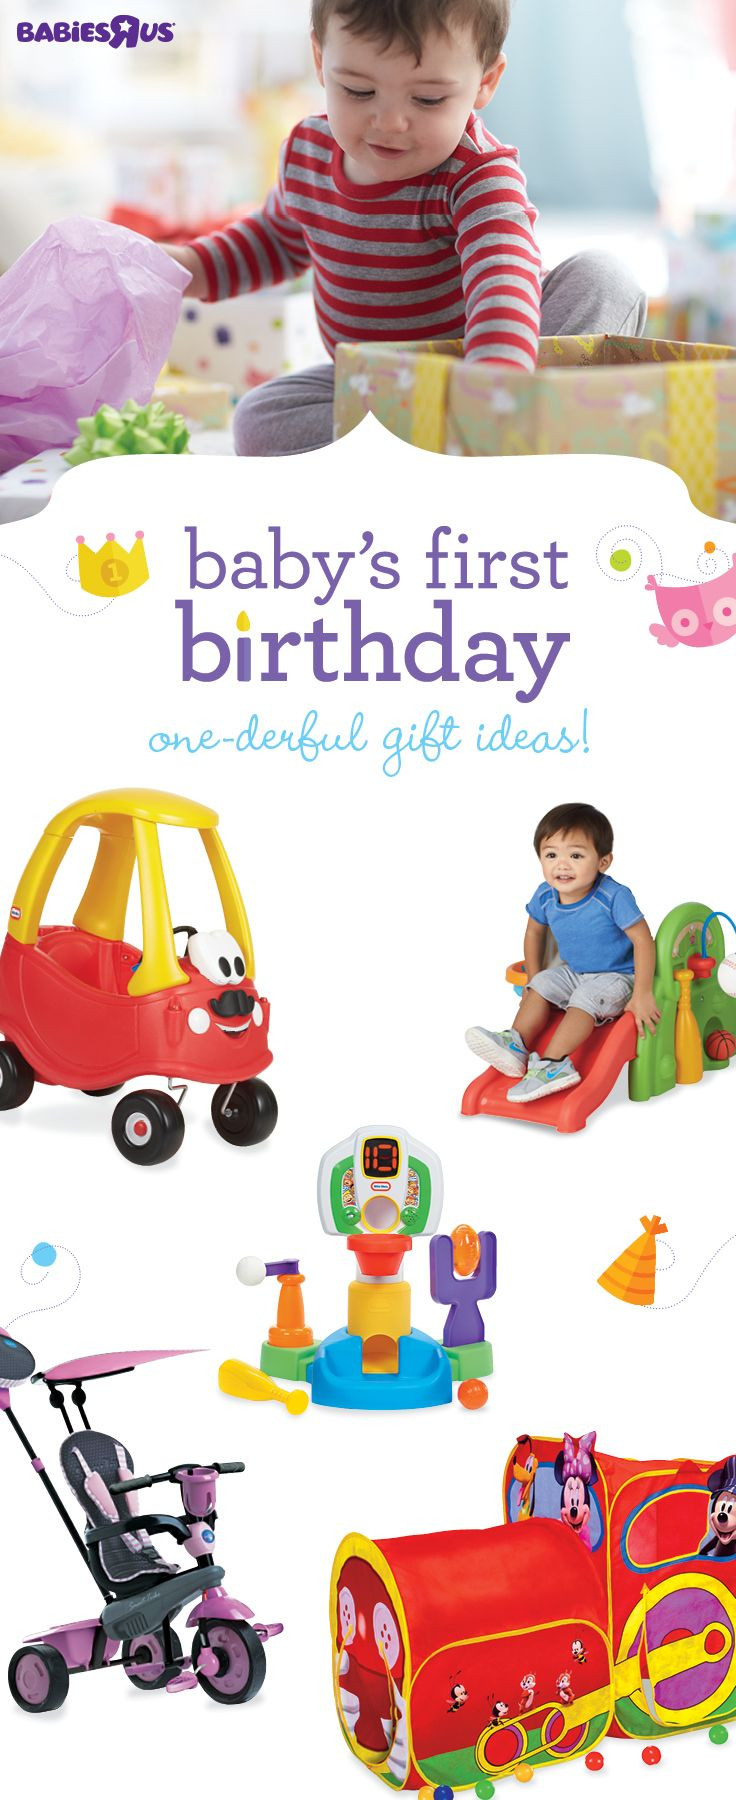 Baby First Birthday Gift Ideas For Her
 Baby’s turning one soon We’ve got some great first